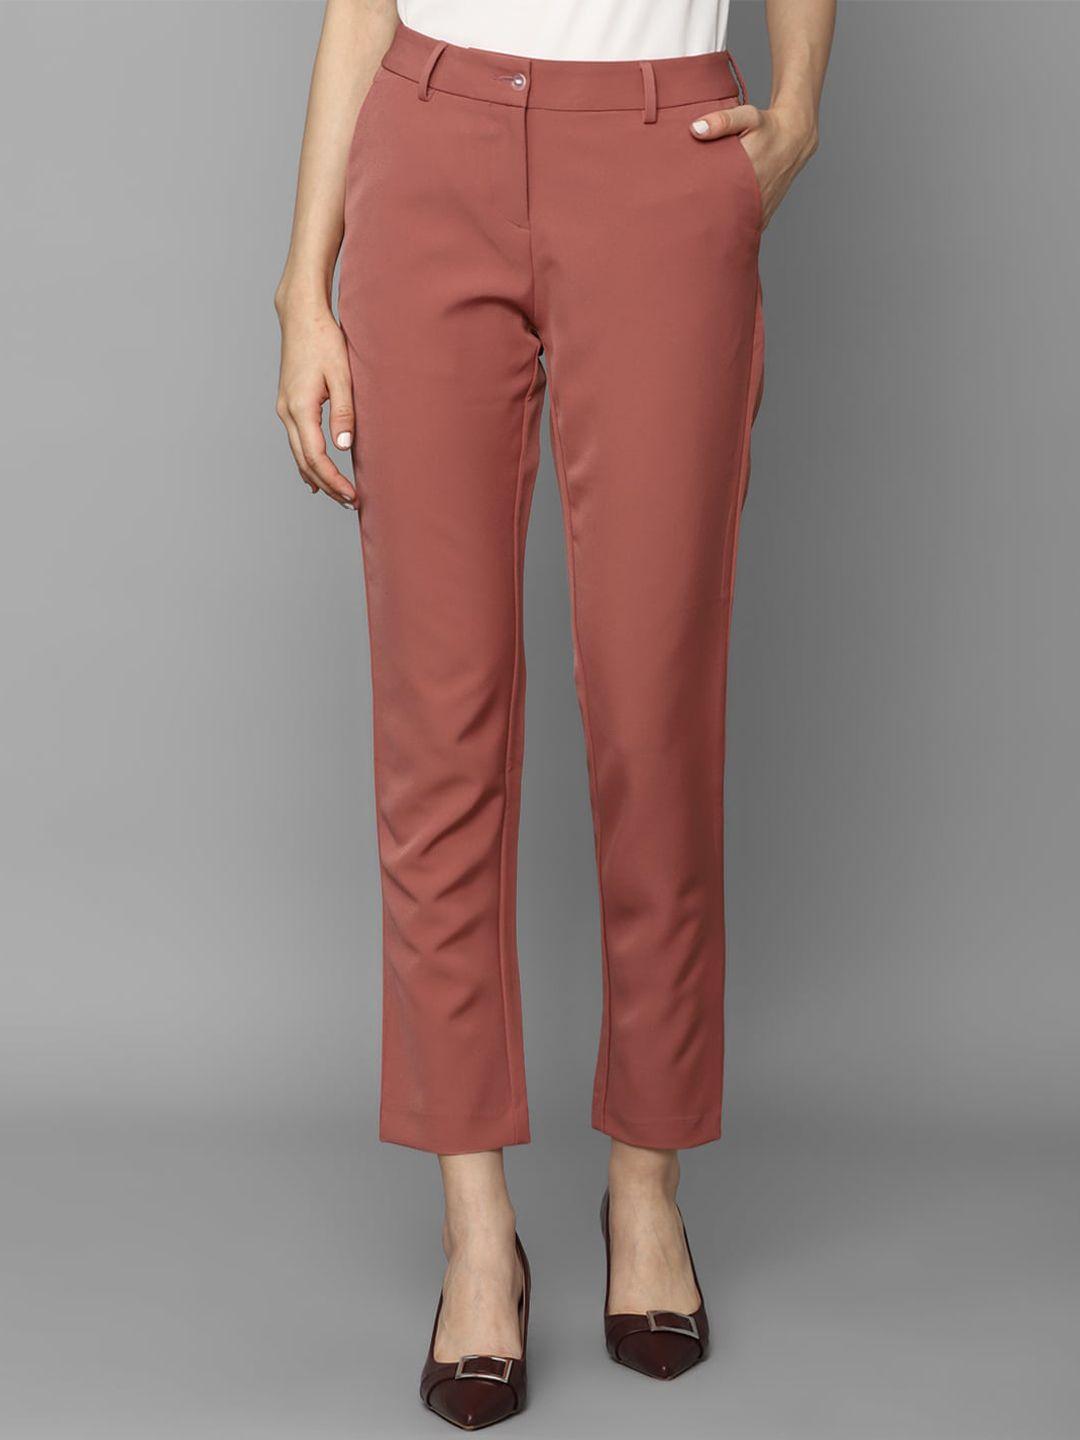 allen solly woman mid-rise cropped trousers